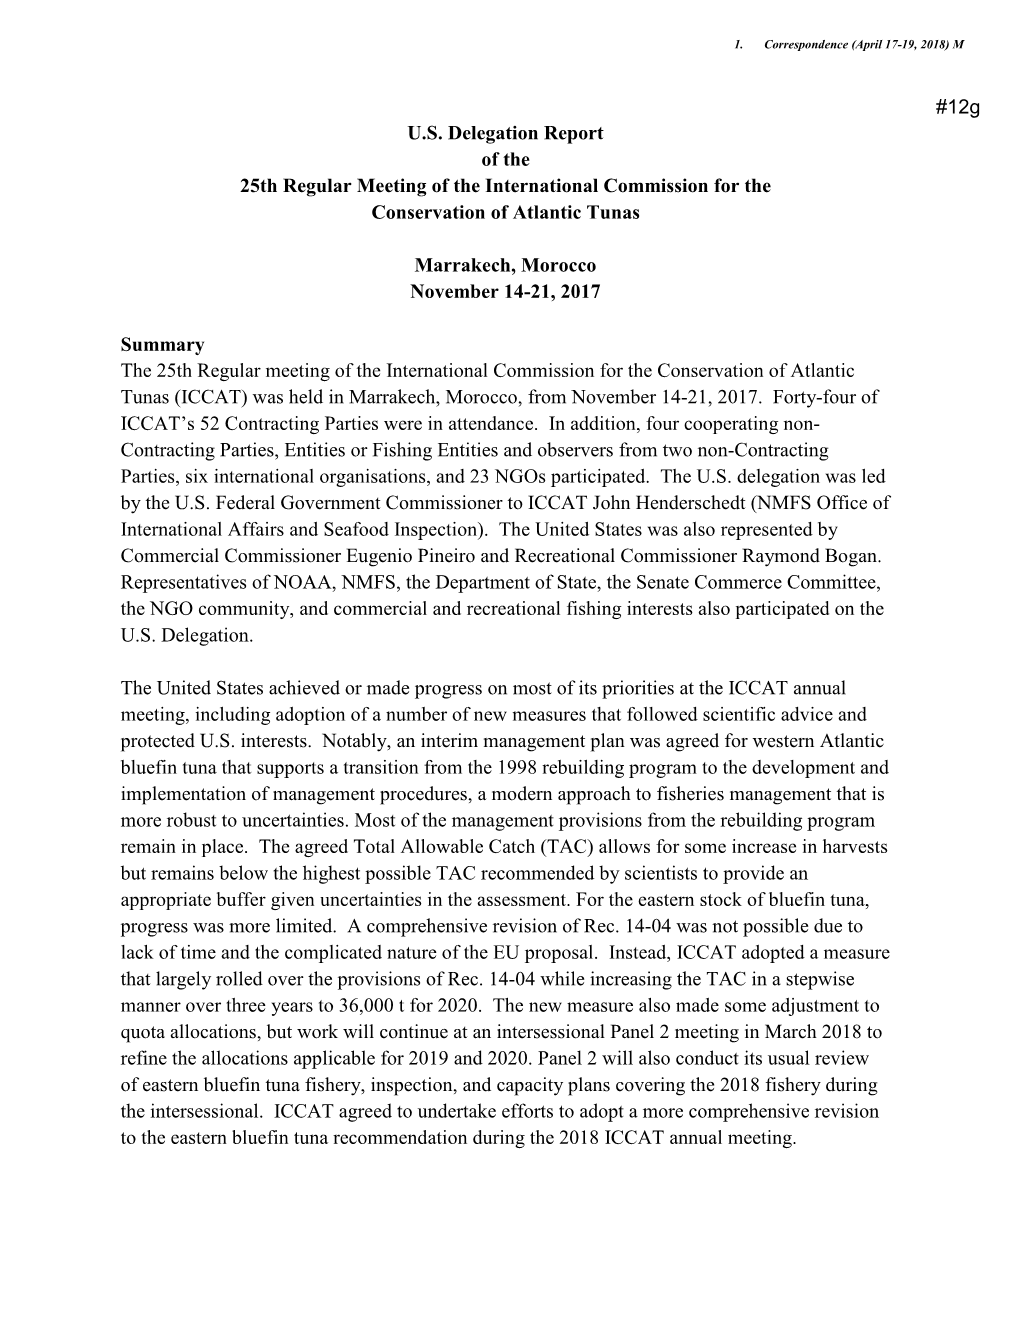 U.S. Delegation Report of the 25Th Regular Meeting of the International Commission for the Conservation of Atlantic Tunas